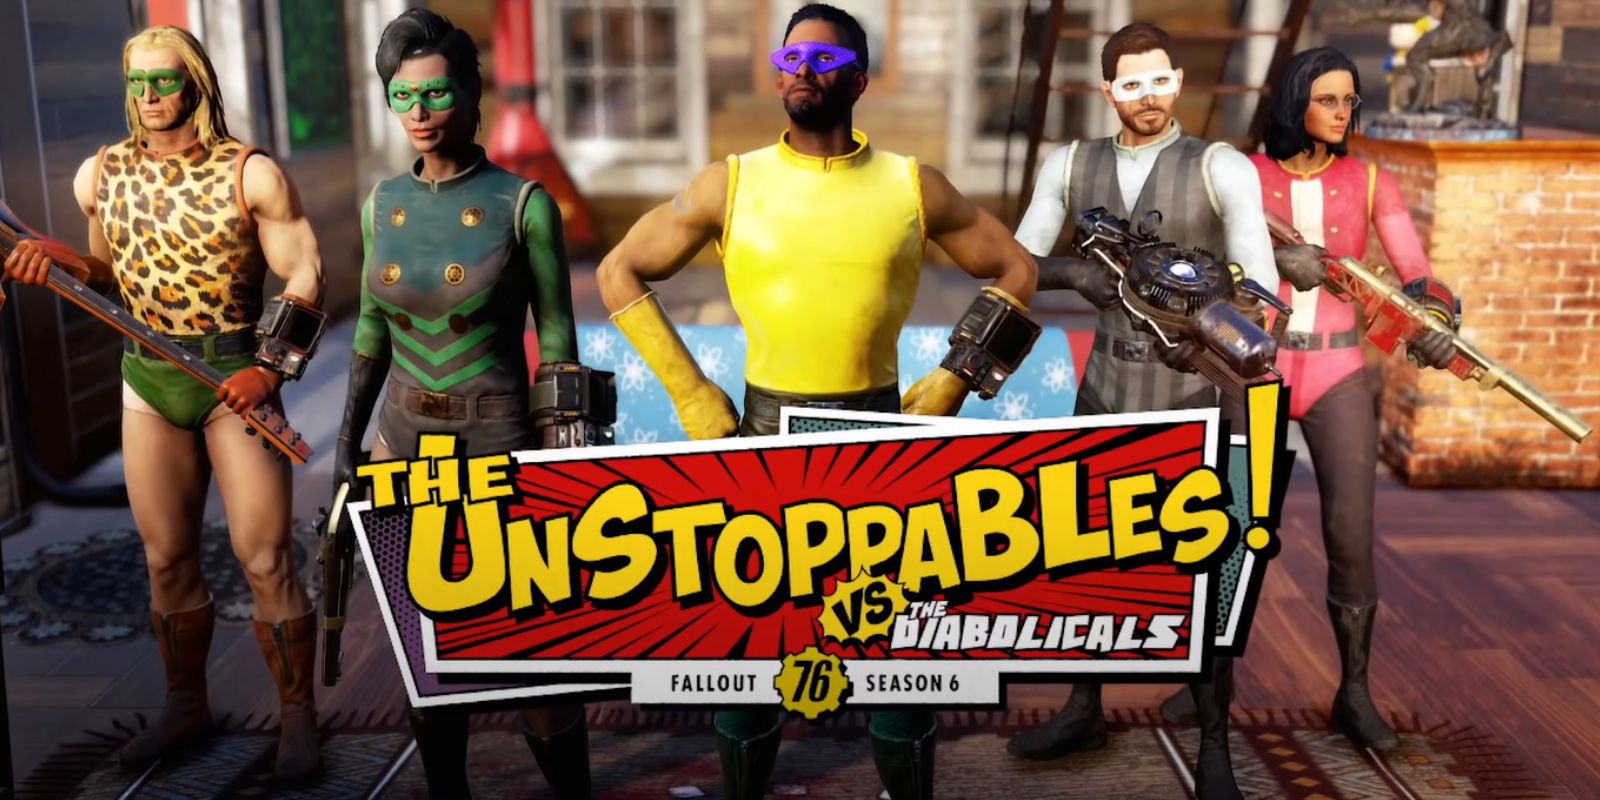 What's New In Fallout 76's New Unstoppables Vs. Diabolicals Season Rewards Challenges Items